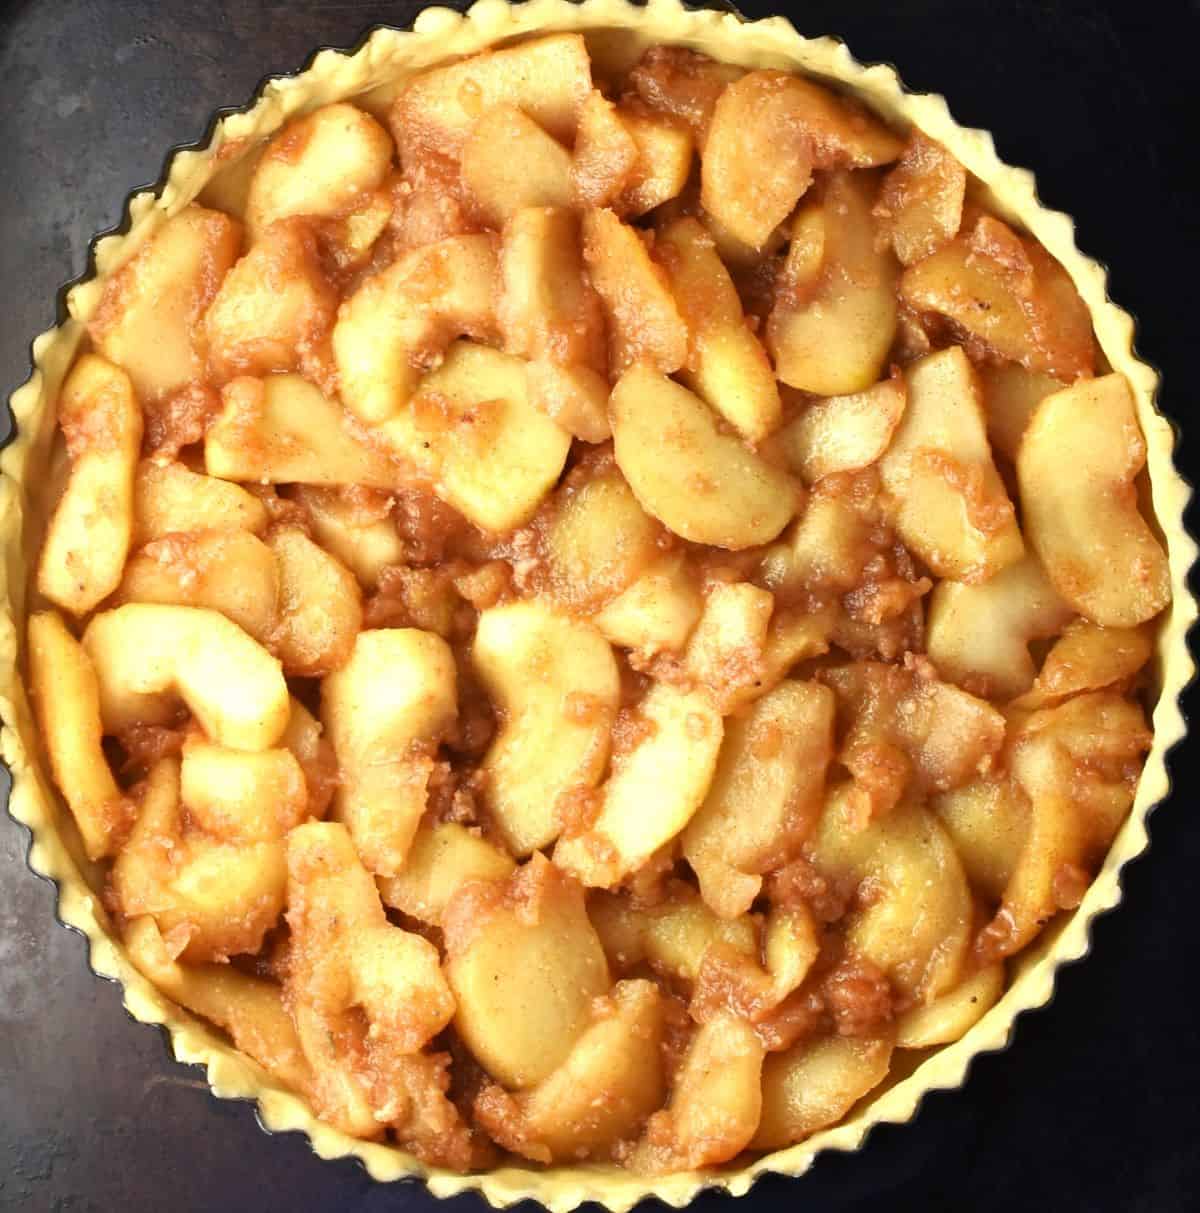 Apple slices in tart pan with pastry.